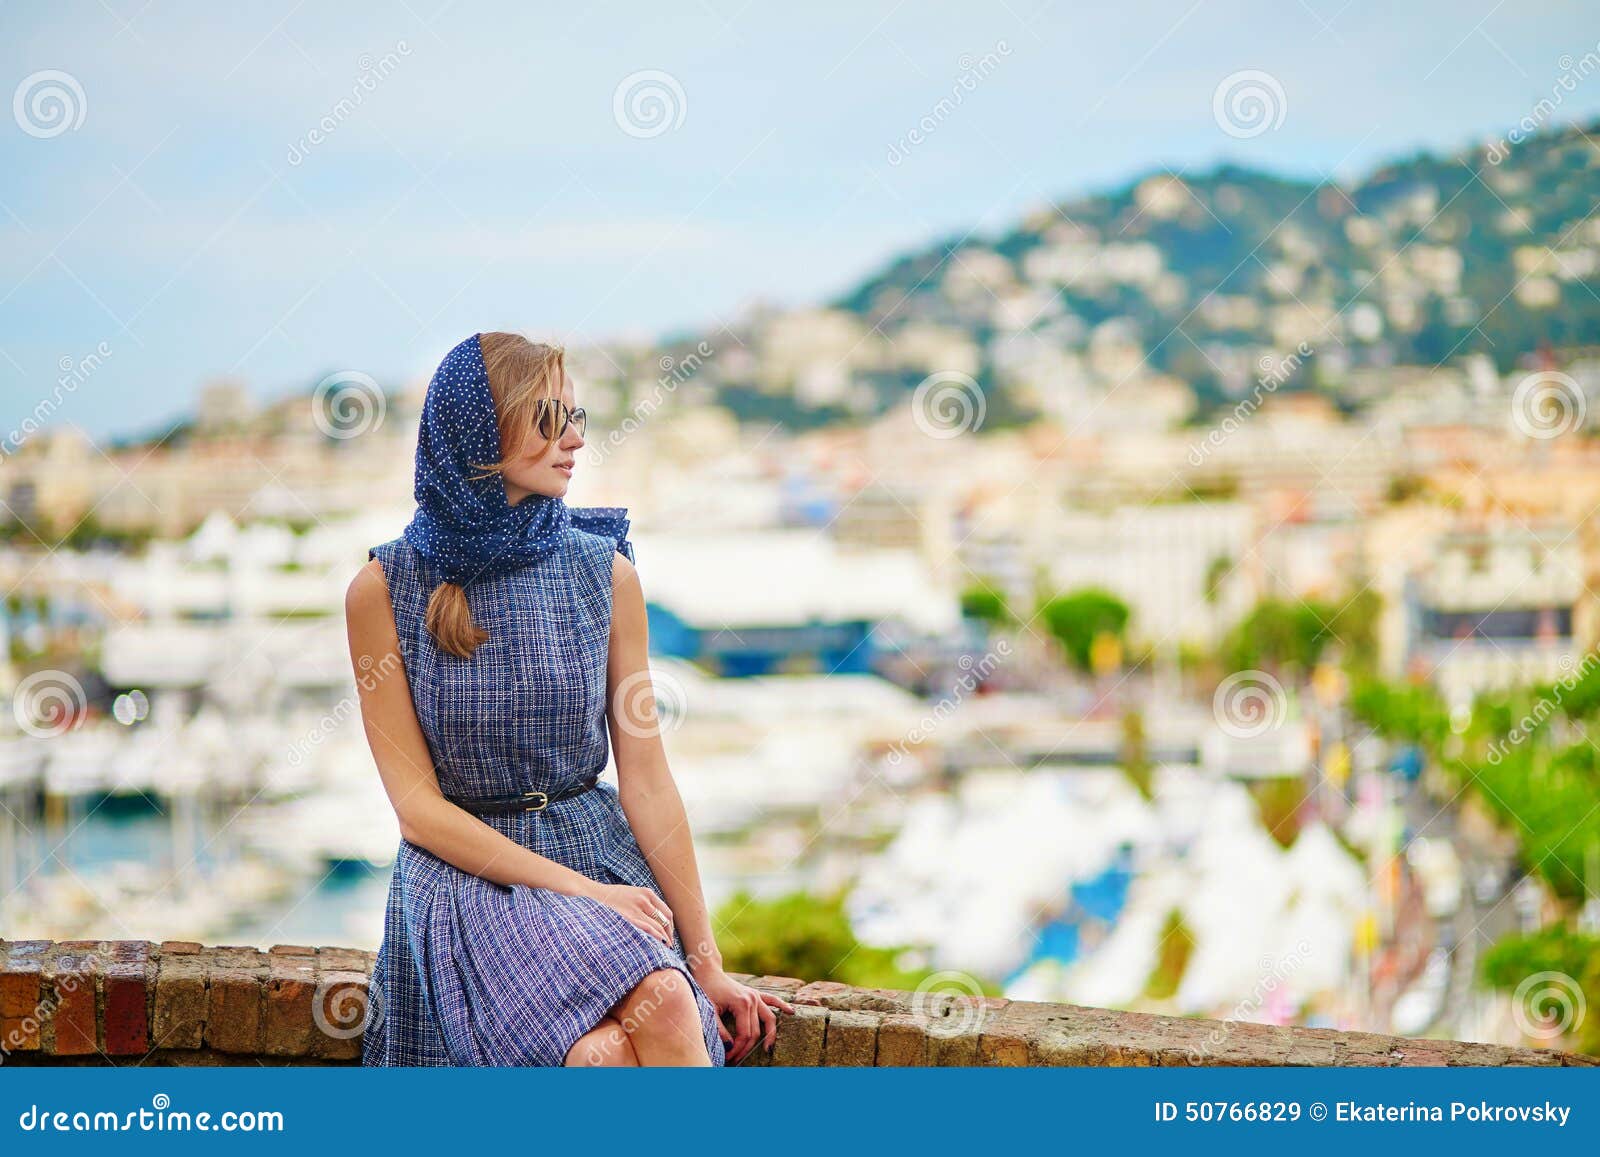 young woman on le suquet hill in cannes, france